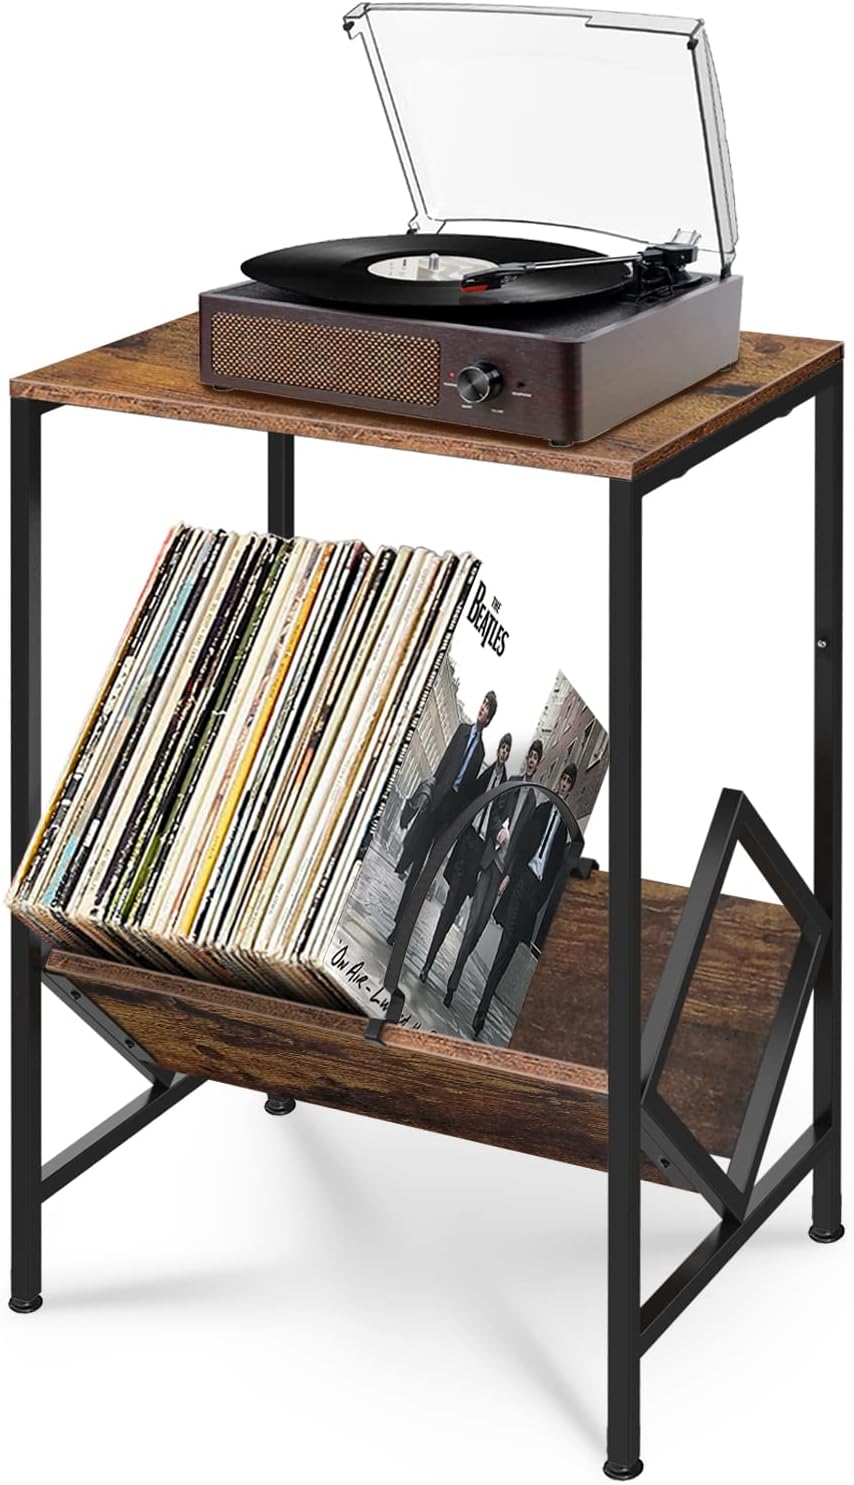 Record Player Stand Table with Album Storage, Record Player Shelf Cabinet Holder Up to 80 Lp, Metal &Wood Vinyl Record Display Desk ,Small Side End Table for Most Turntables